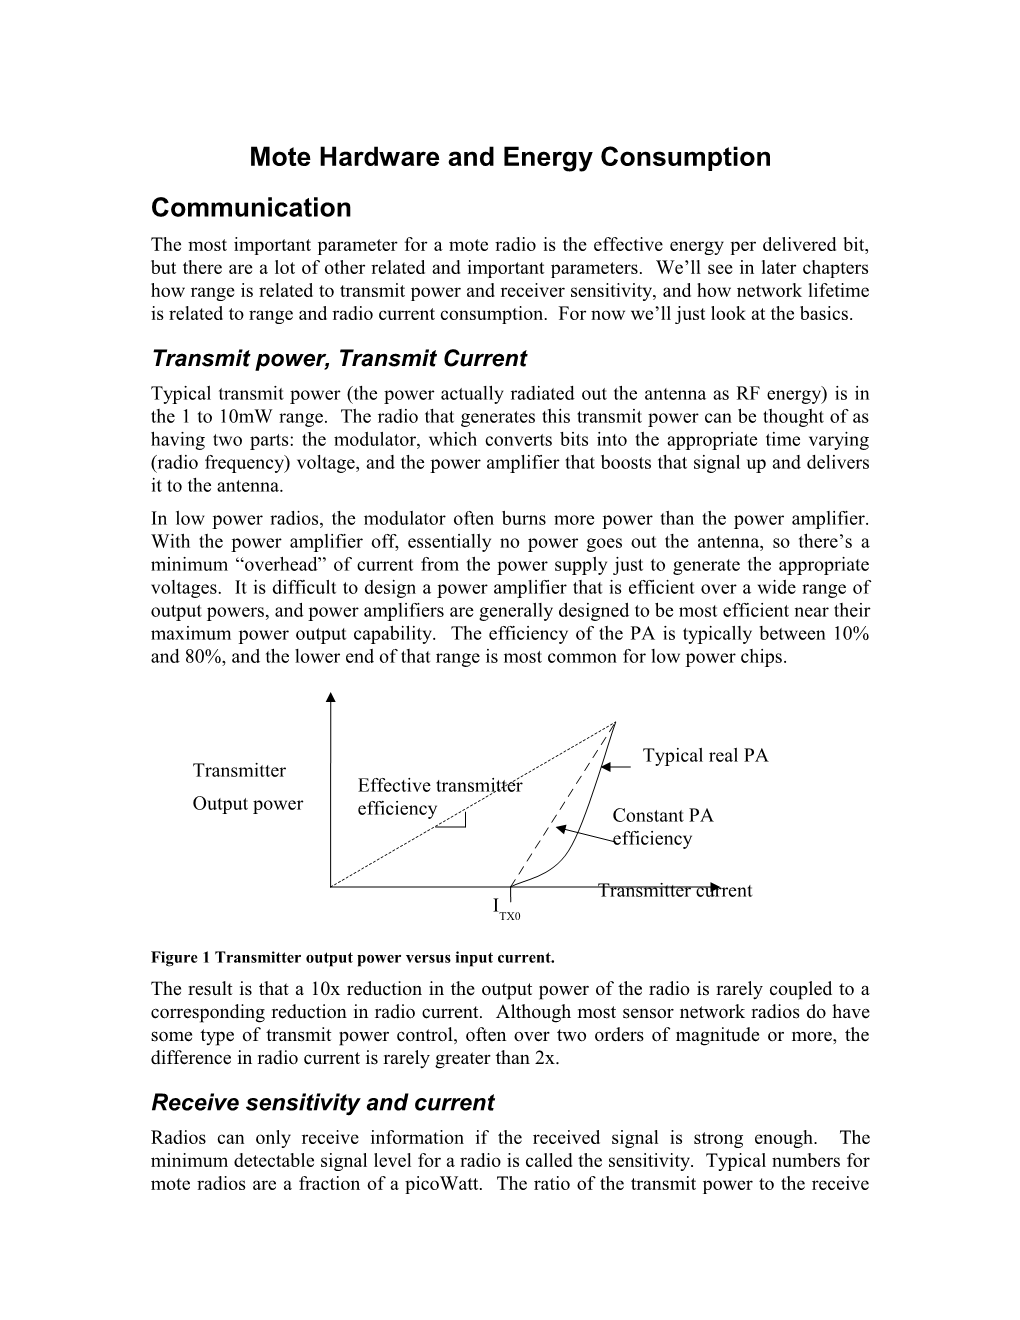 Mote Hardware and Energy Consumption